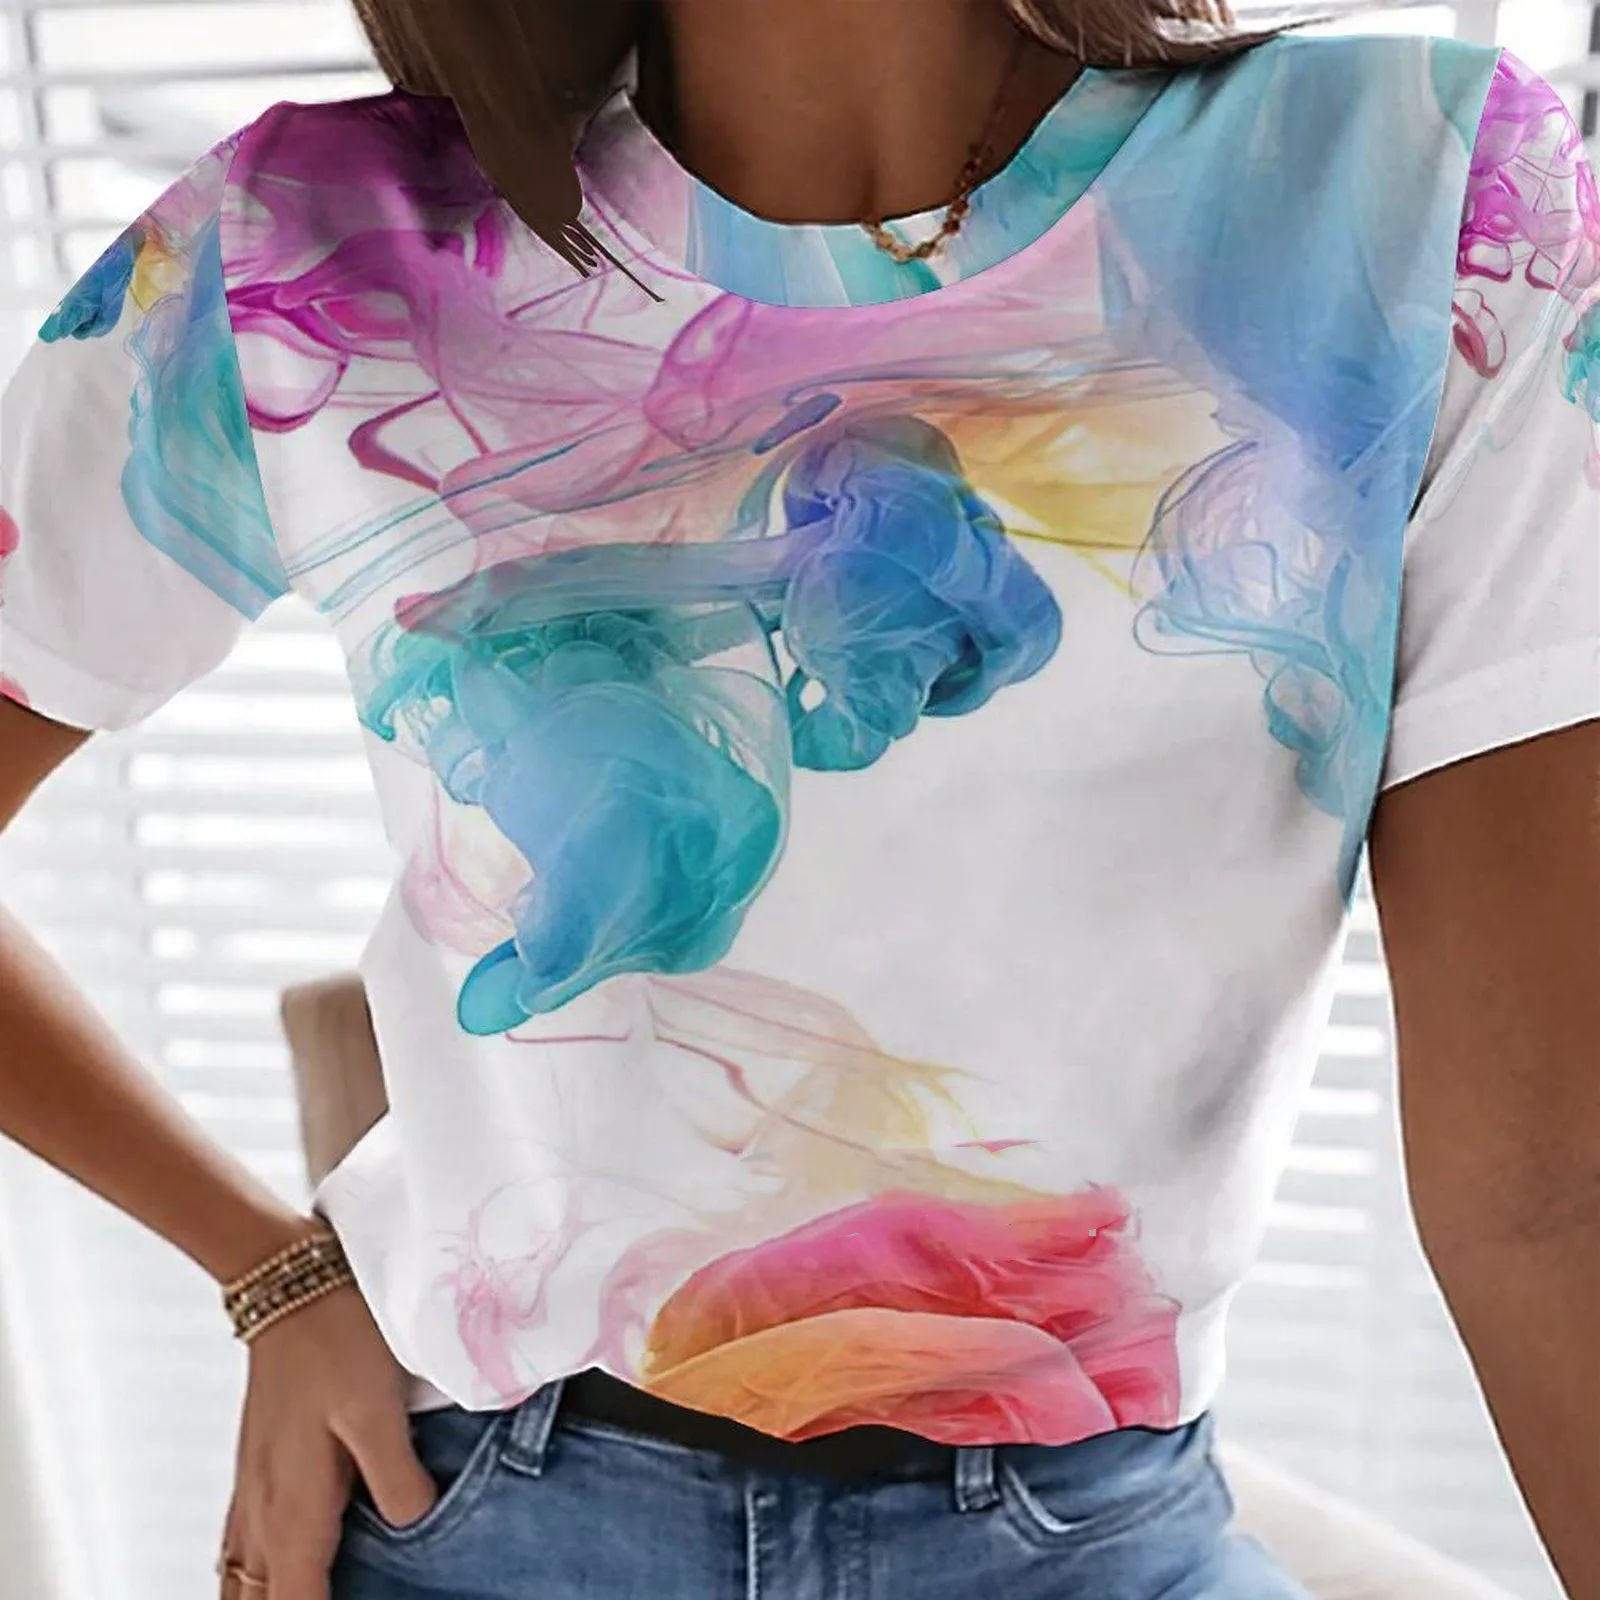 2022 New SummerAnimal Graffiti 3d Printed T-shirts Peacock Dragonfly Graphic Women Short-sleeve Y2k Clothes Female Casual Tops